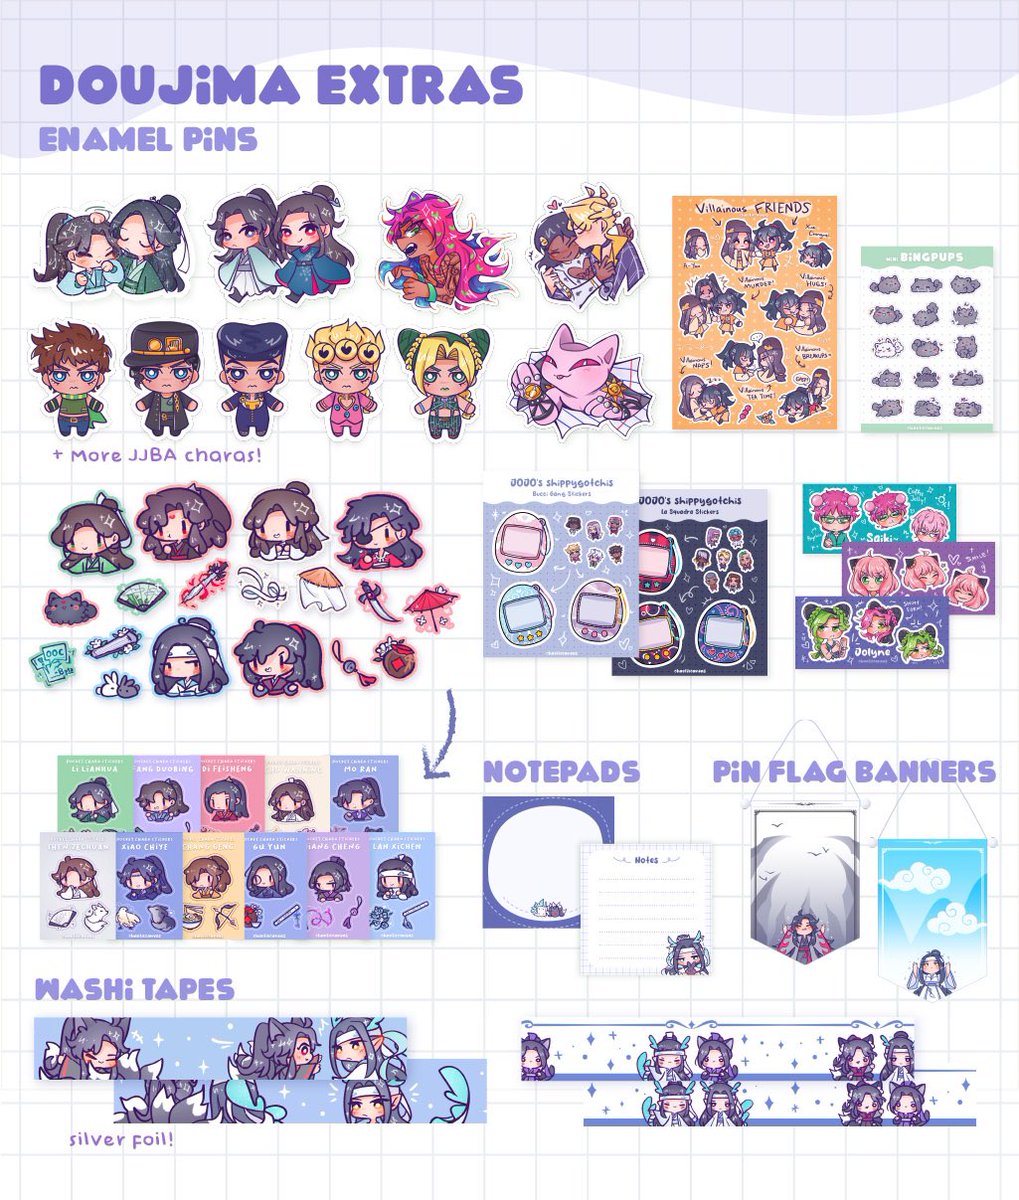 [SH0P UPDATE May ‘24] 
Releasing the leftovers from Doujima tonight! 🌟

✨ Sh0p will open on 17 May ‘24, 12AM (SGT)

Most of the jjba merch are on sale too, please help me clear them so I have more space ;v; 

➡️ chaotixcanvas.bigcartel.com